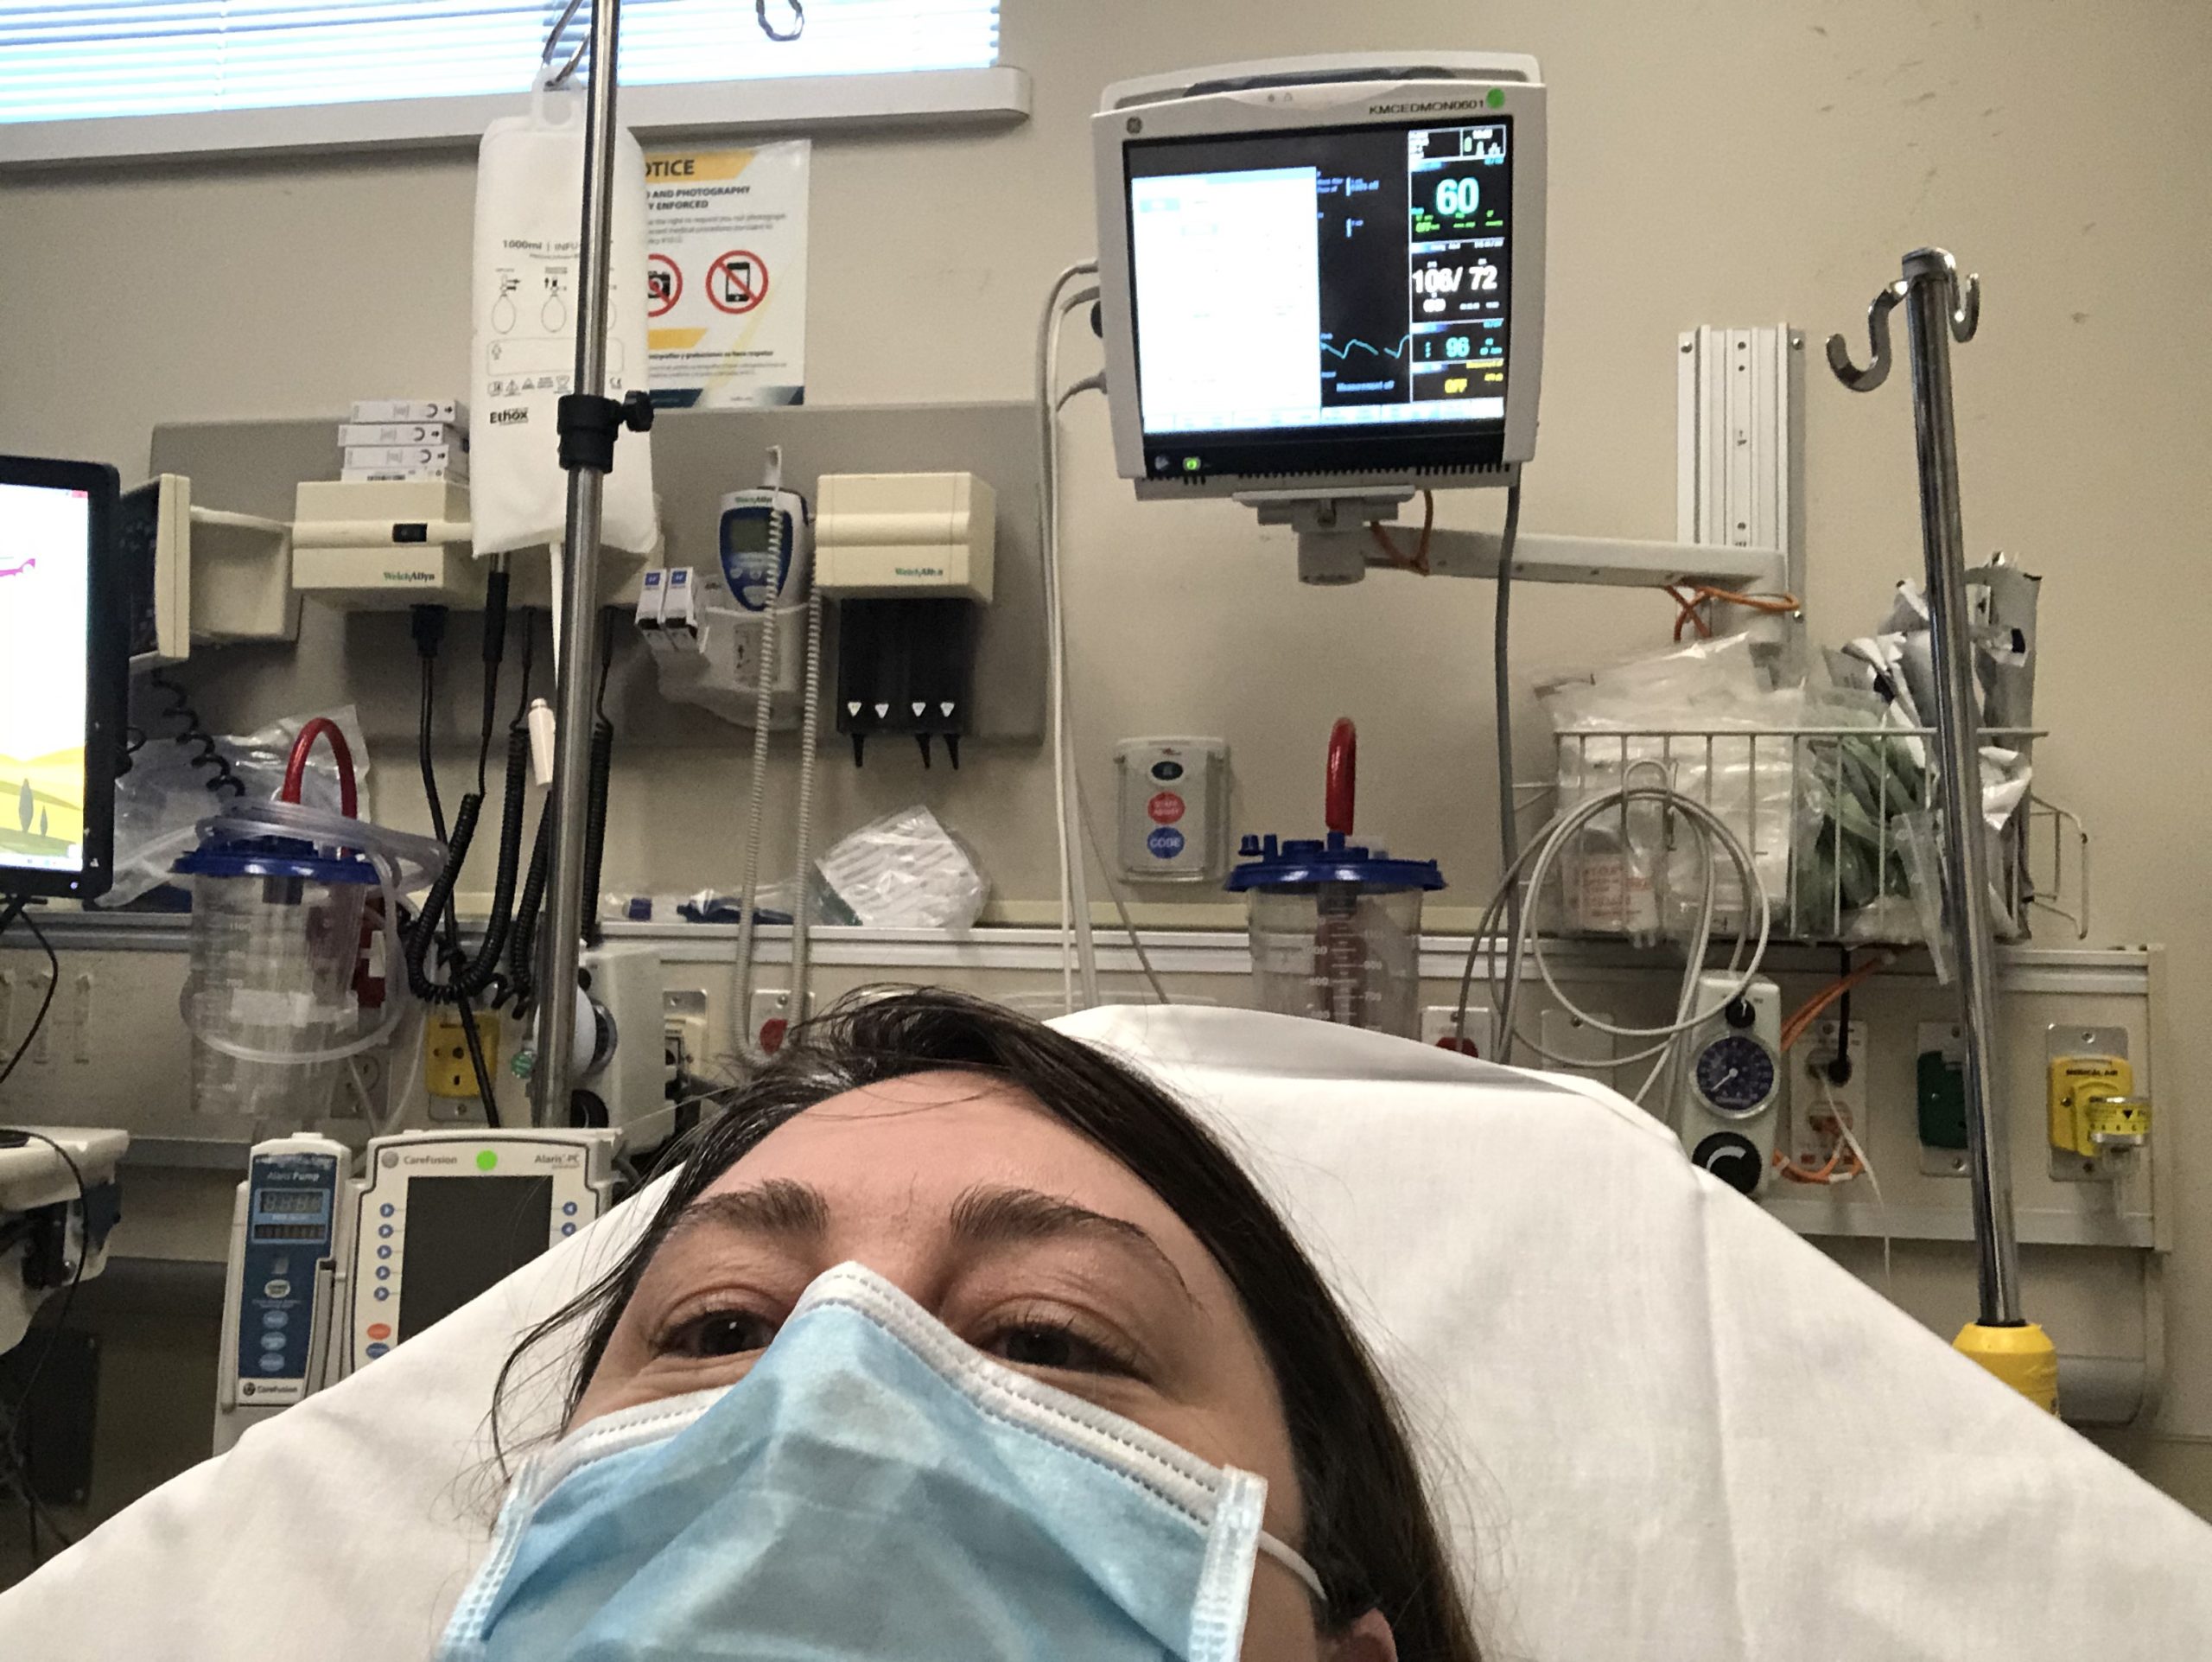 Anna King went to the KADLEC Emergency Room twice during her battle with COVID-19. Once she was having trouble breathing, another time the virus attacked her inner ear, giving her vertigo. CREDIT: Anna King/N3